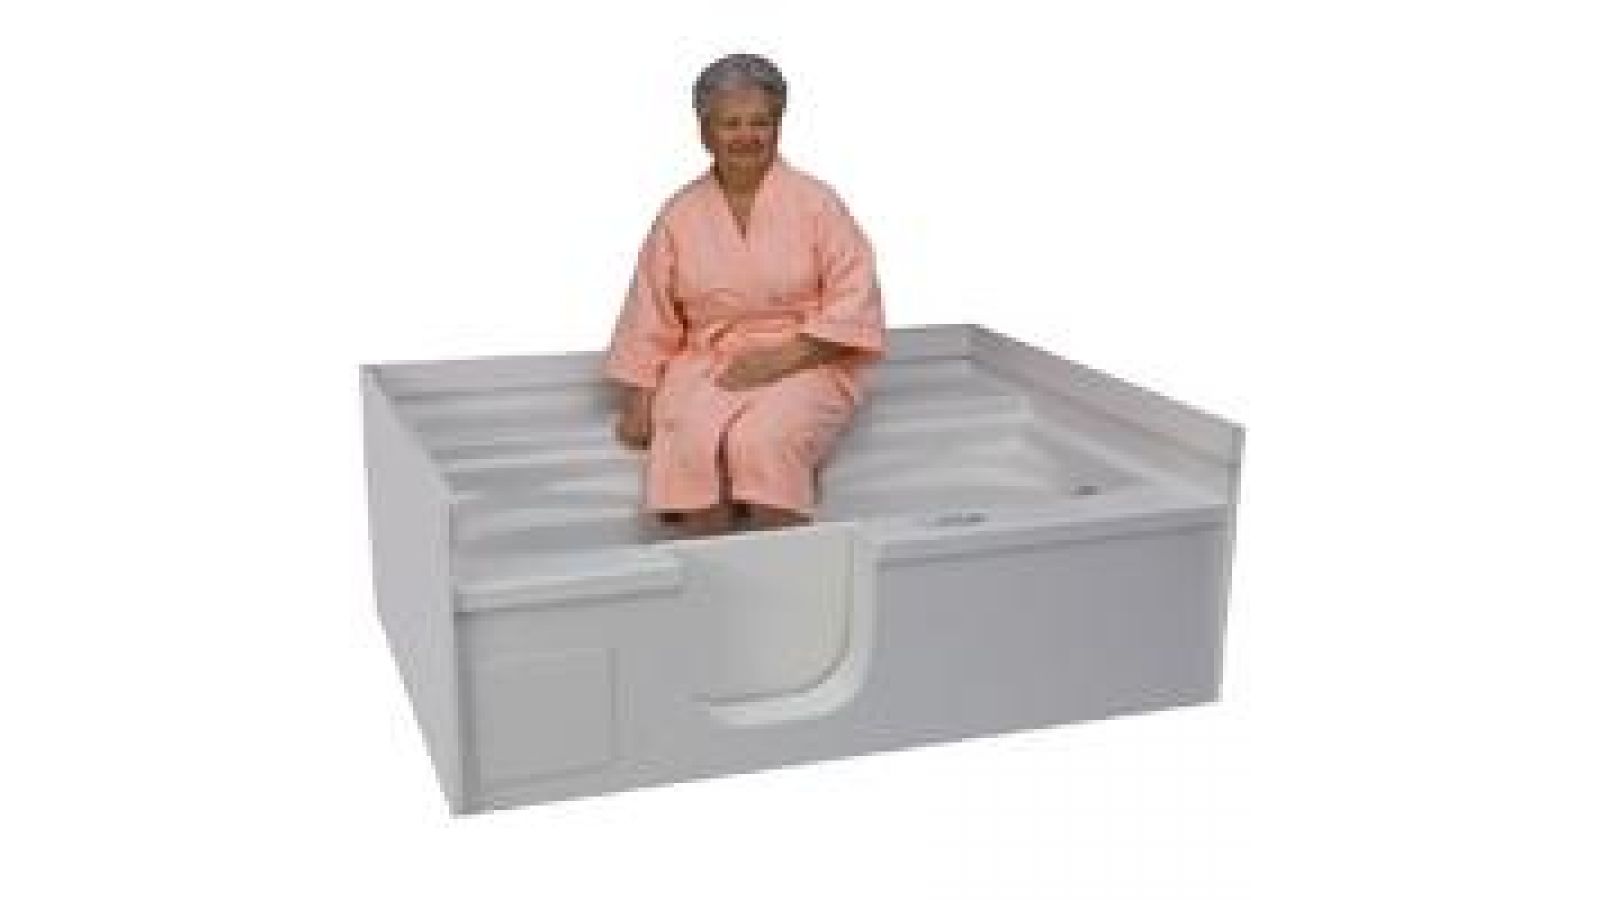 Safety Bath SoLo with Shower Deck